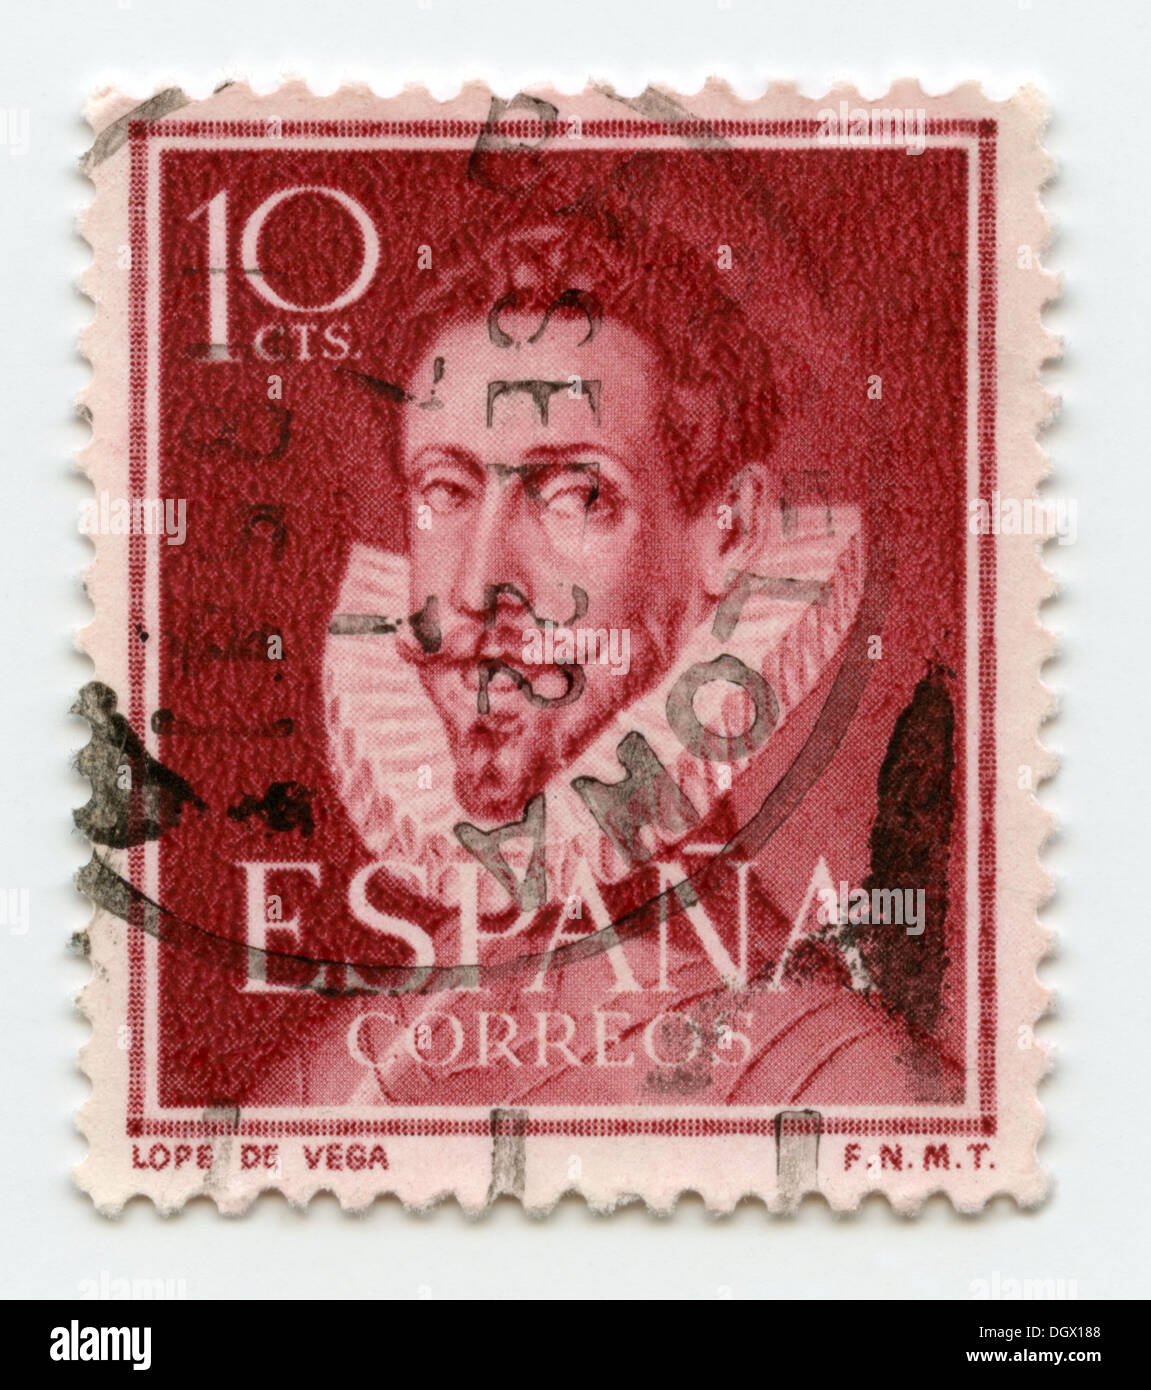 Spain postage stamp depicting Lope de Vega, a Spanish playwright and poet Stock Photo